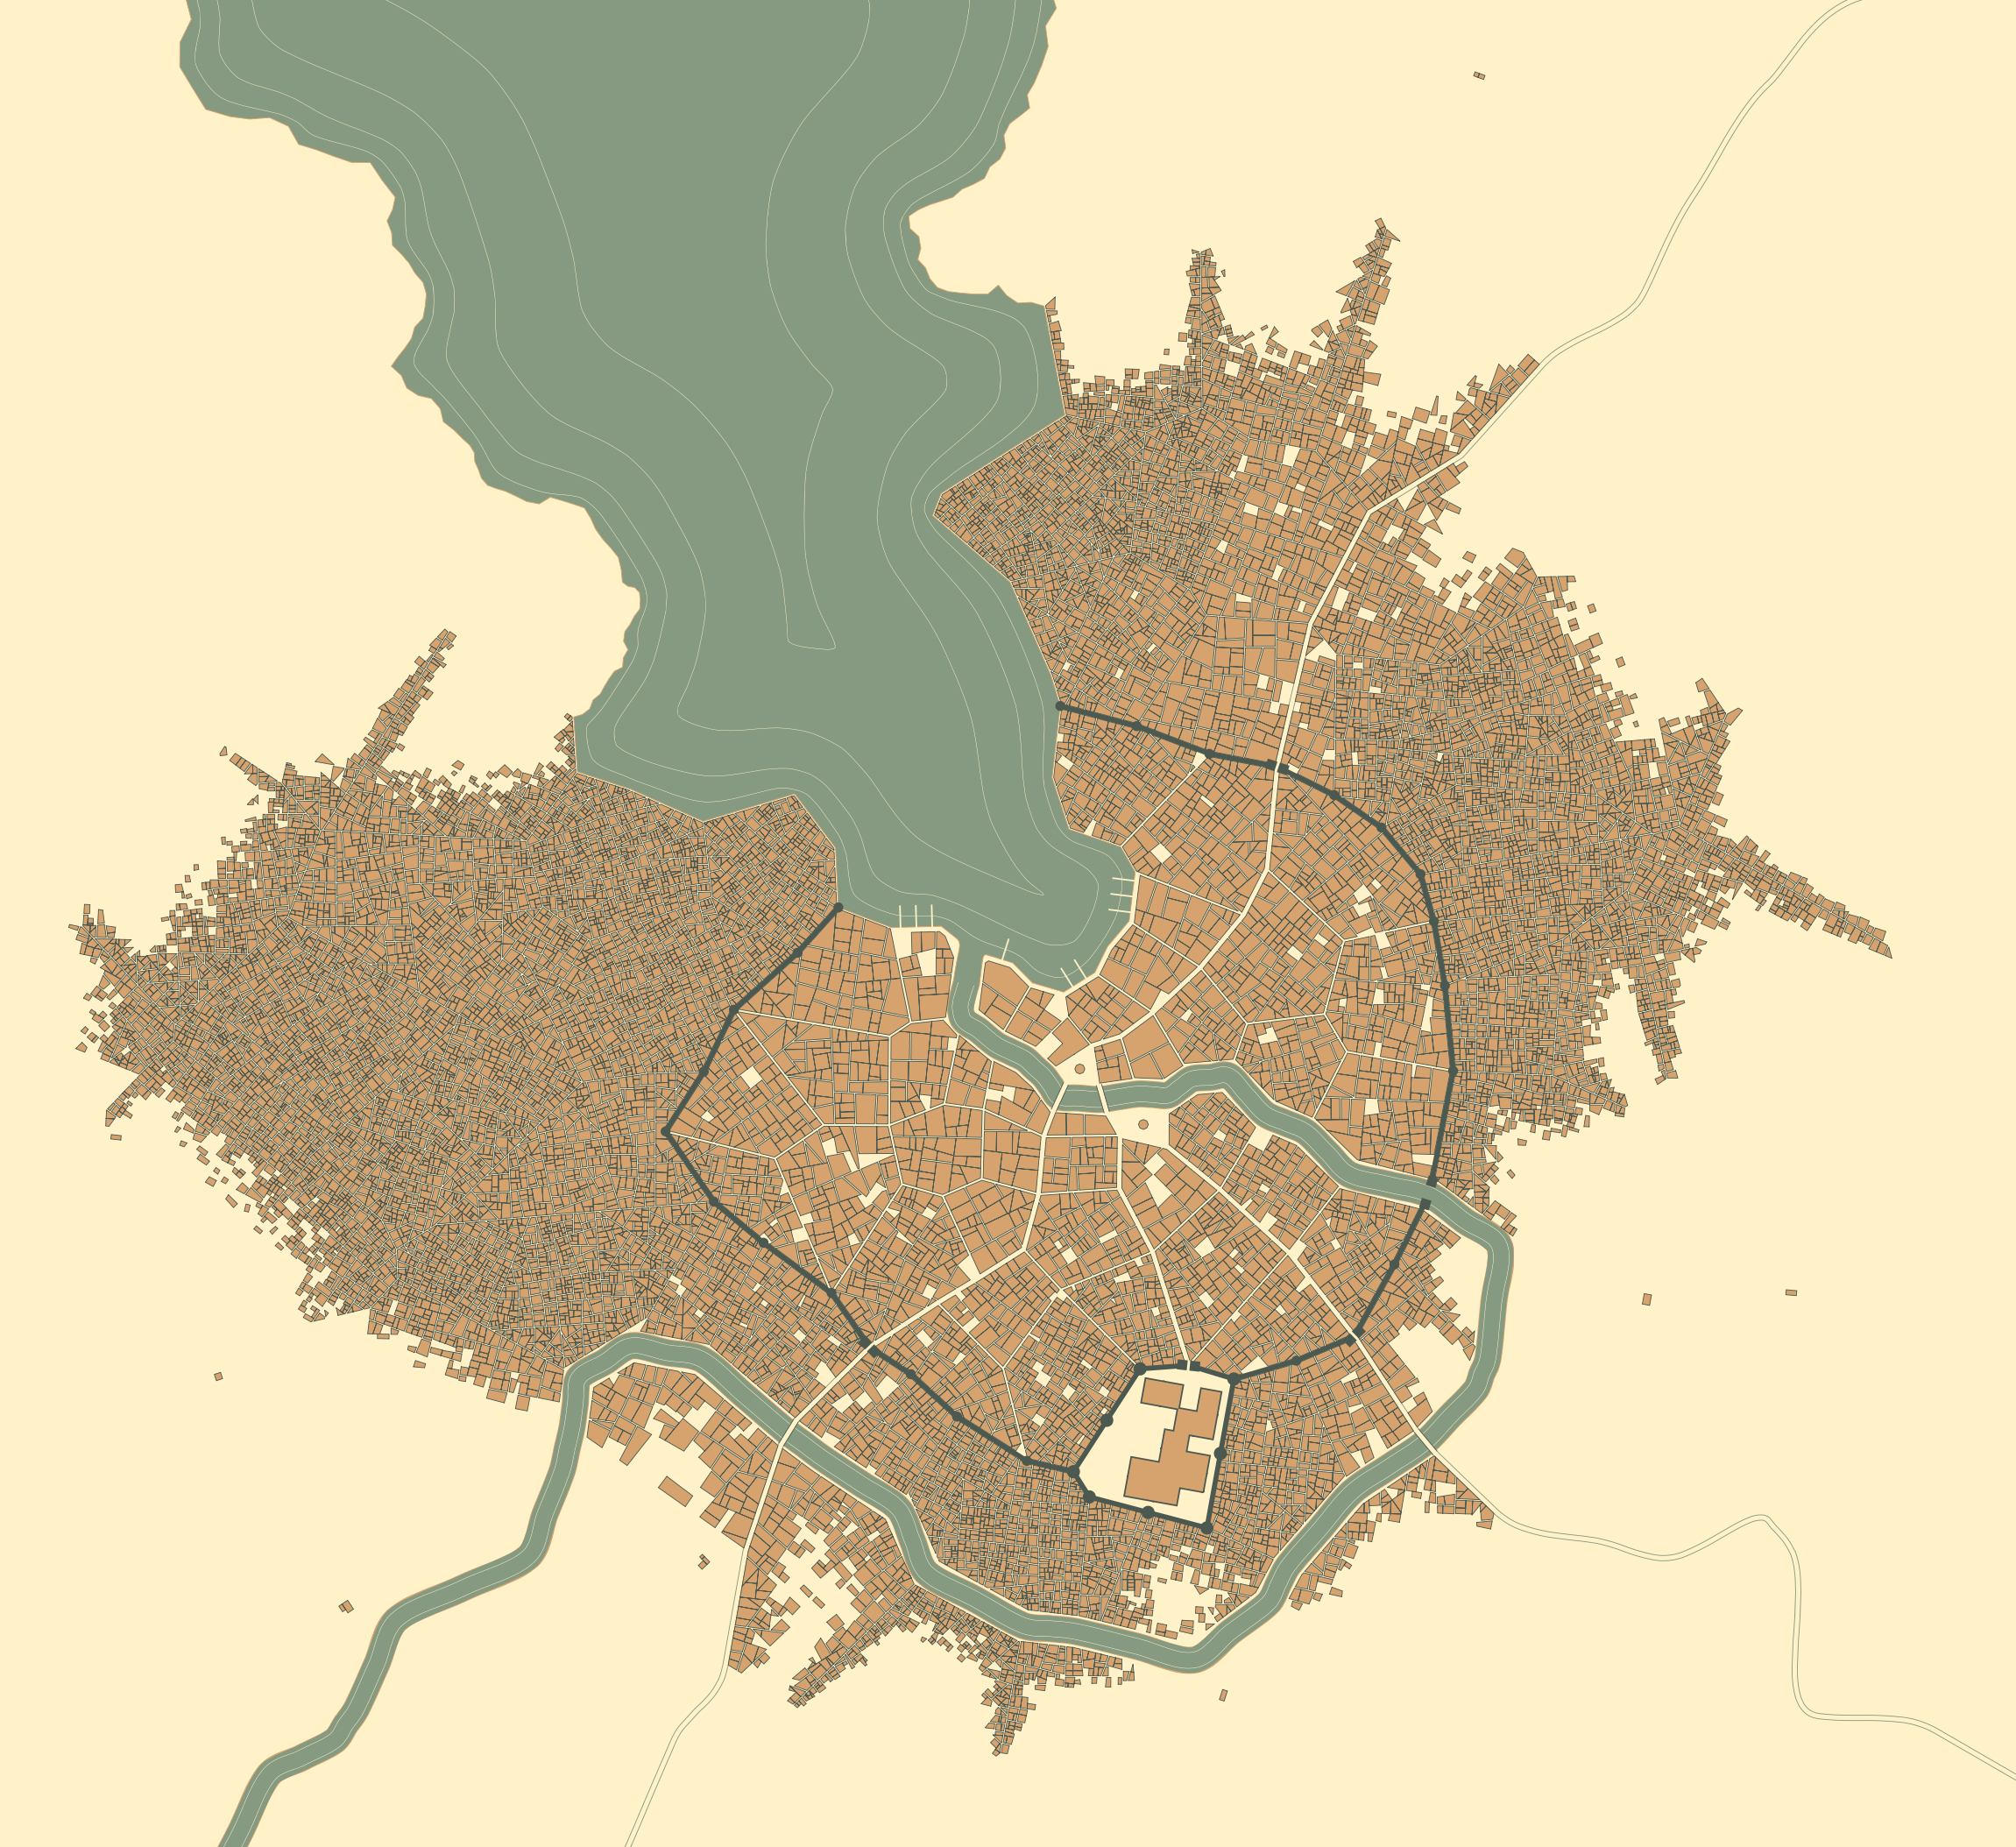 Placeholder map of Agad